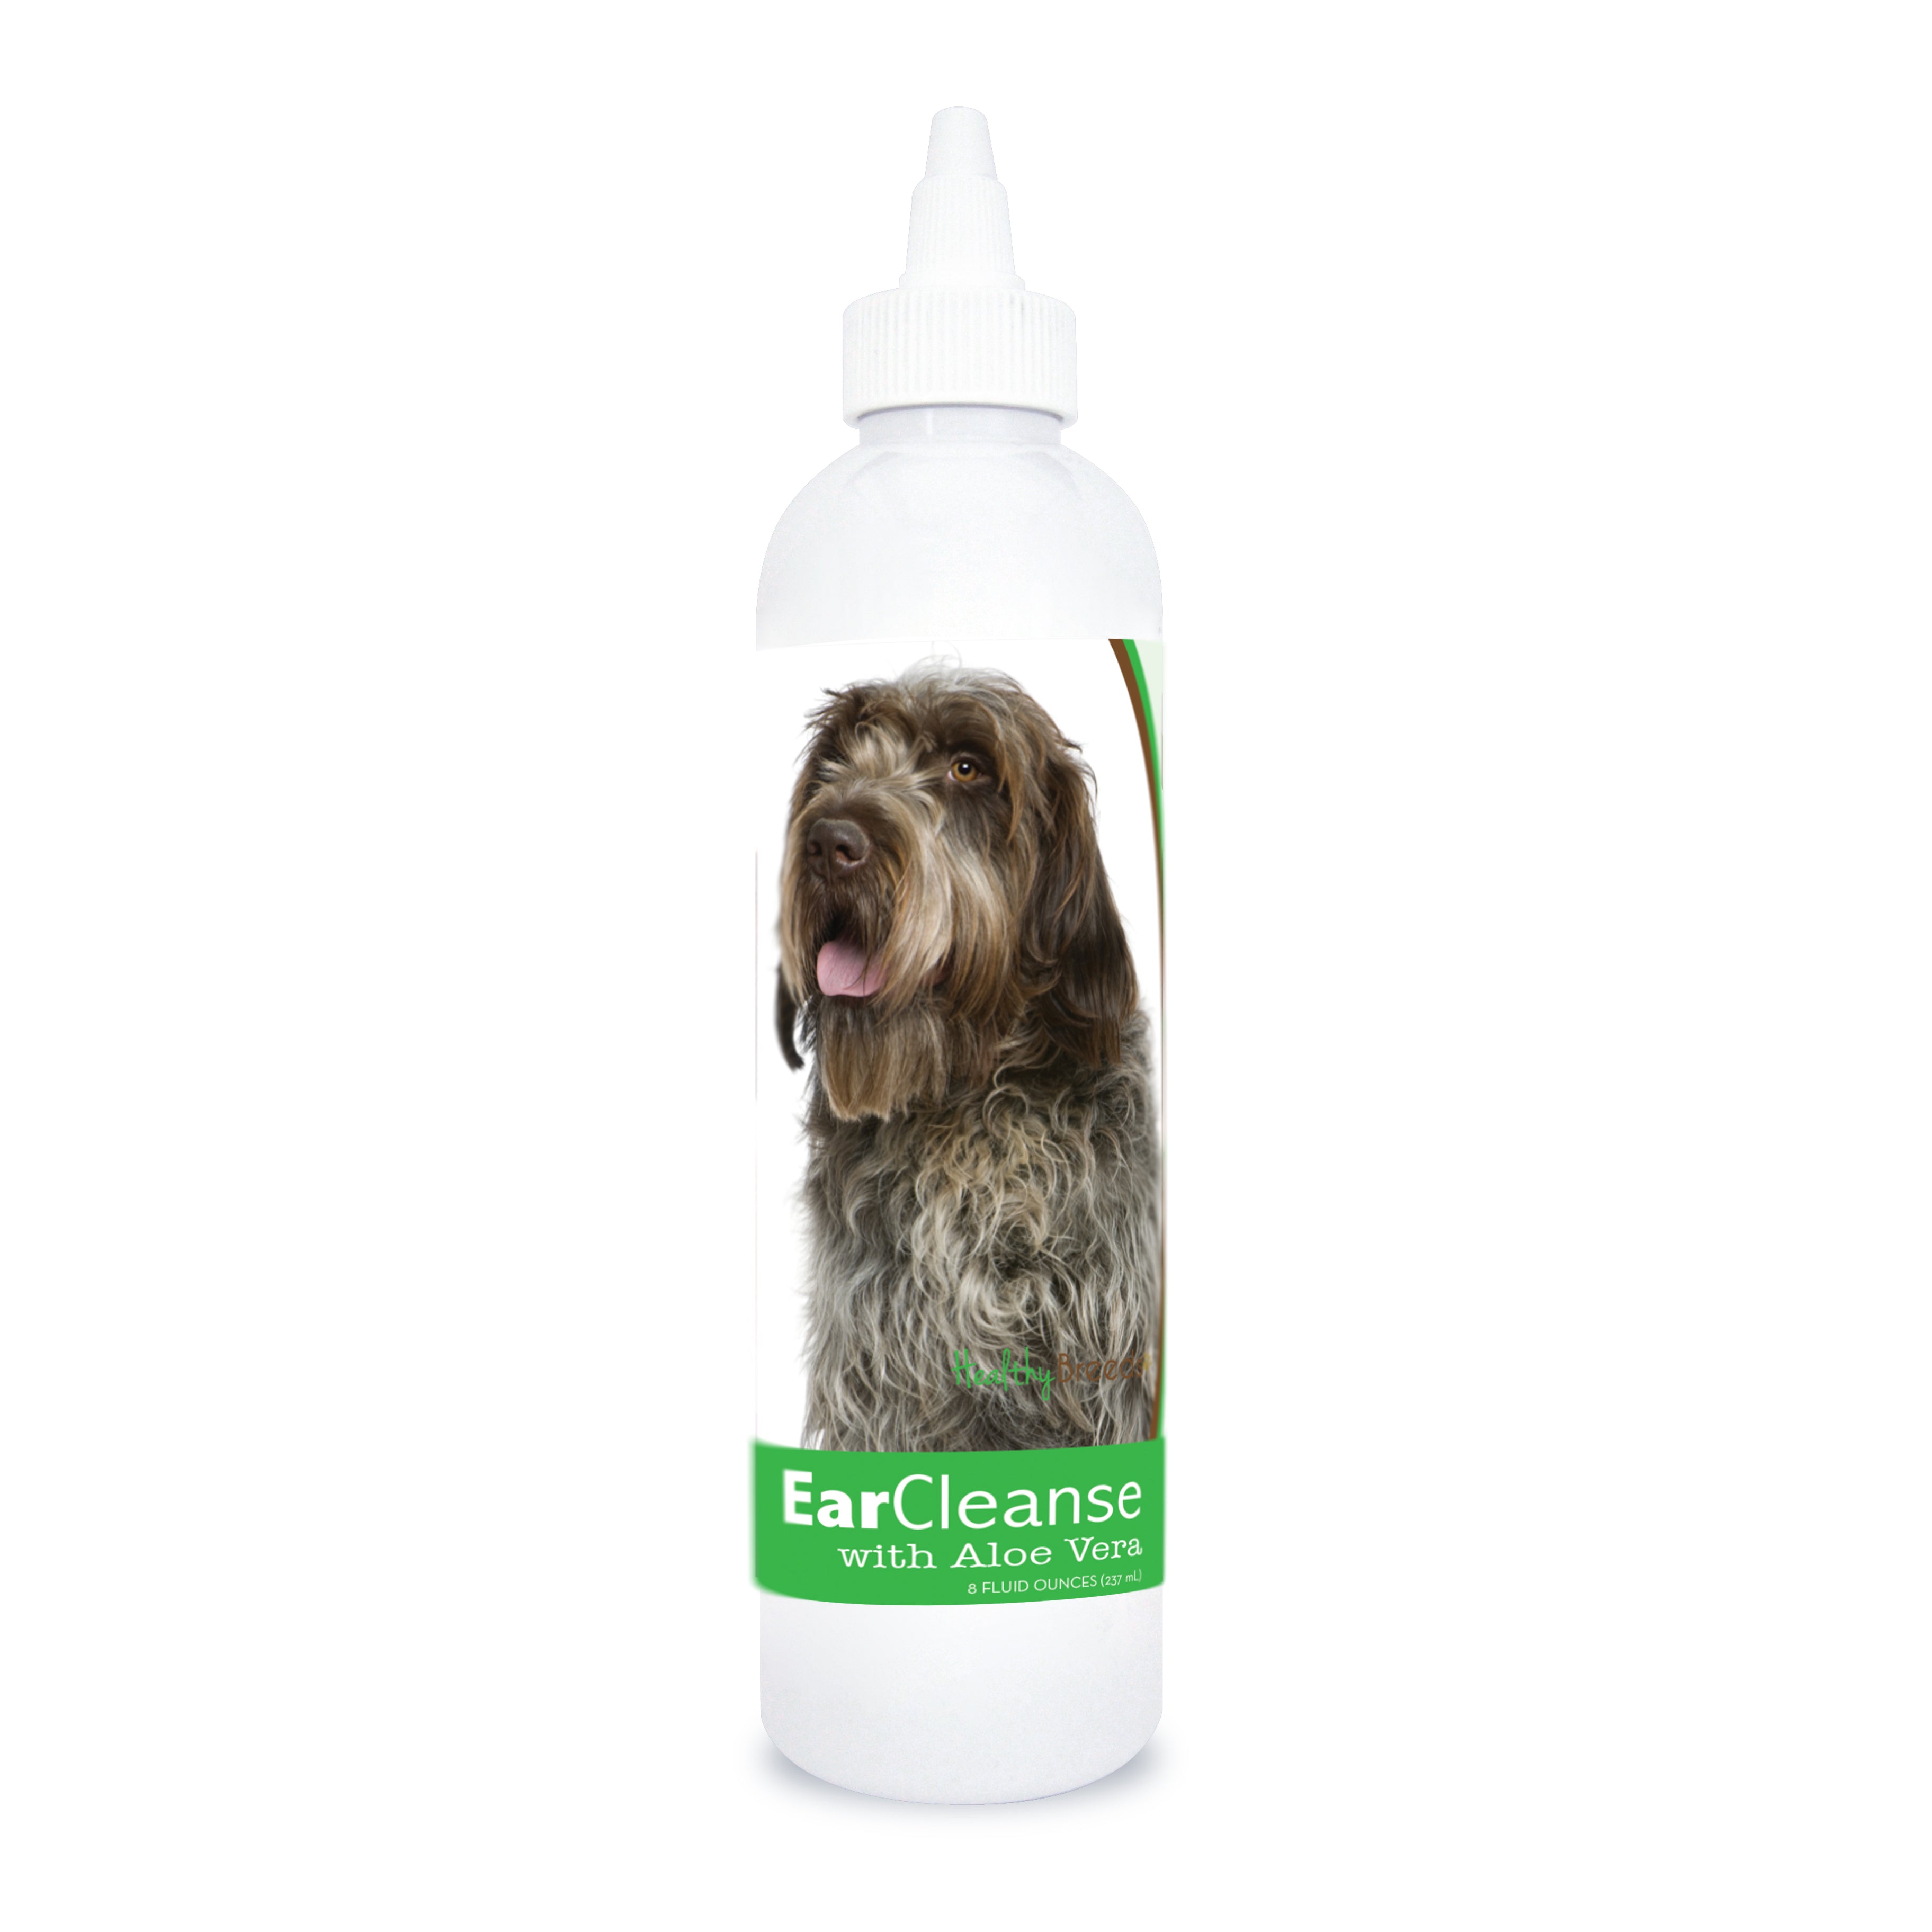 Wirehaired Pointing Griffon Ear Cleanse with Aloe Vera Cucumber Melon 8 oz